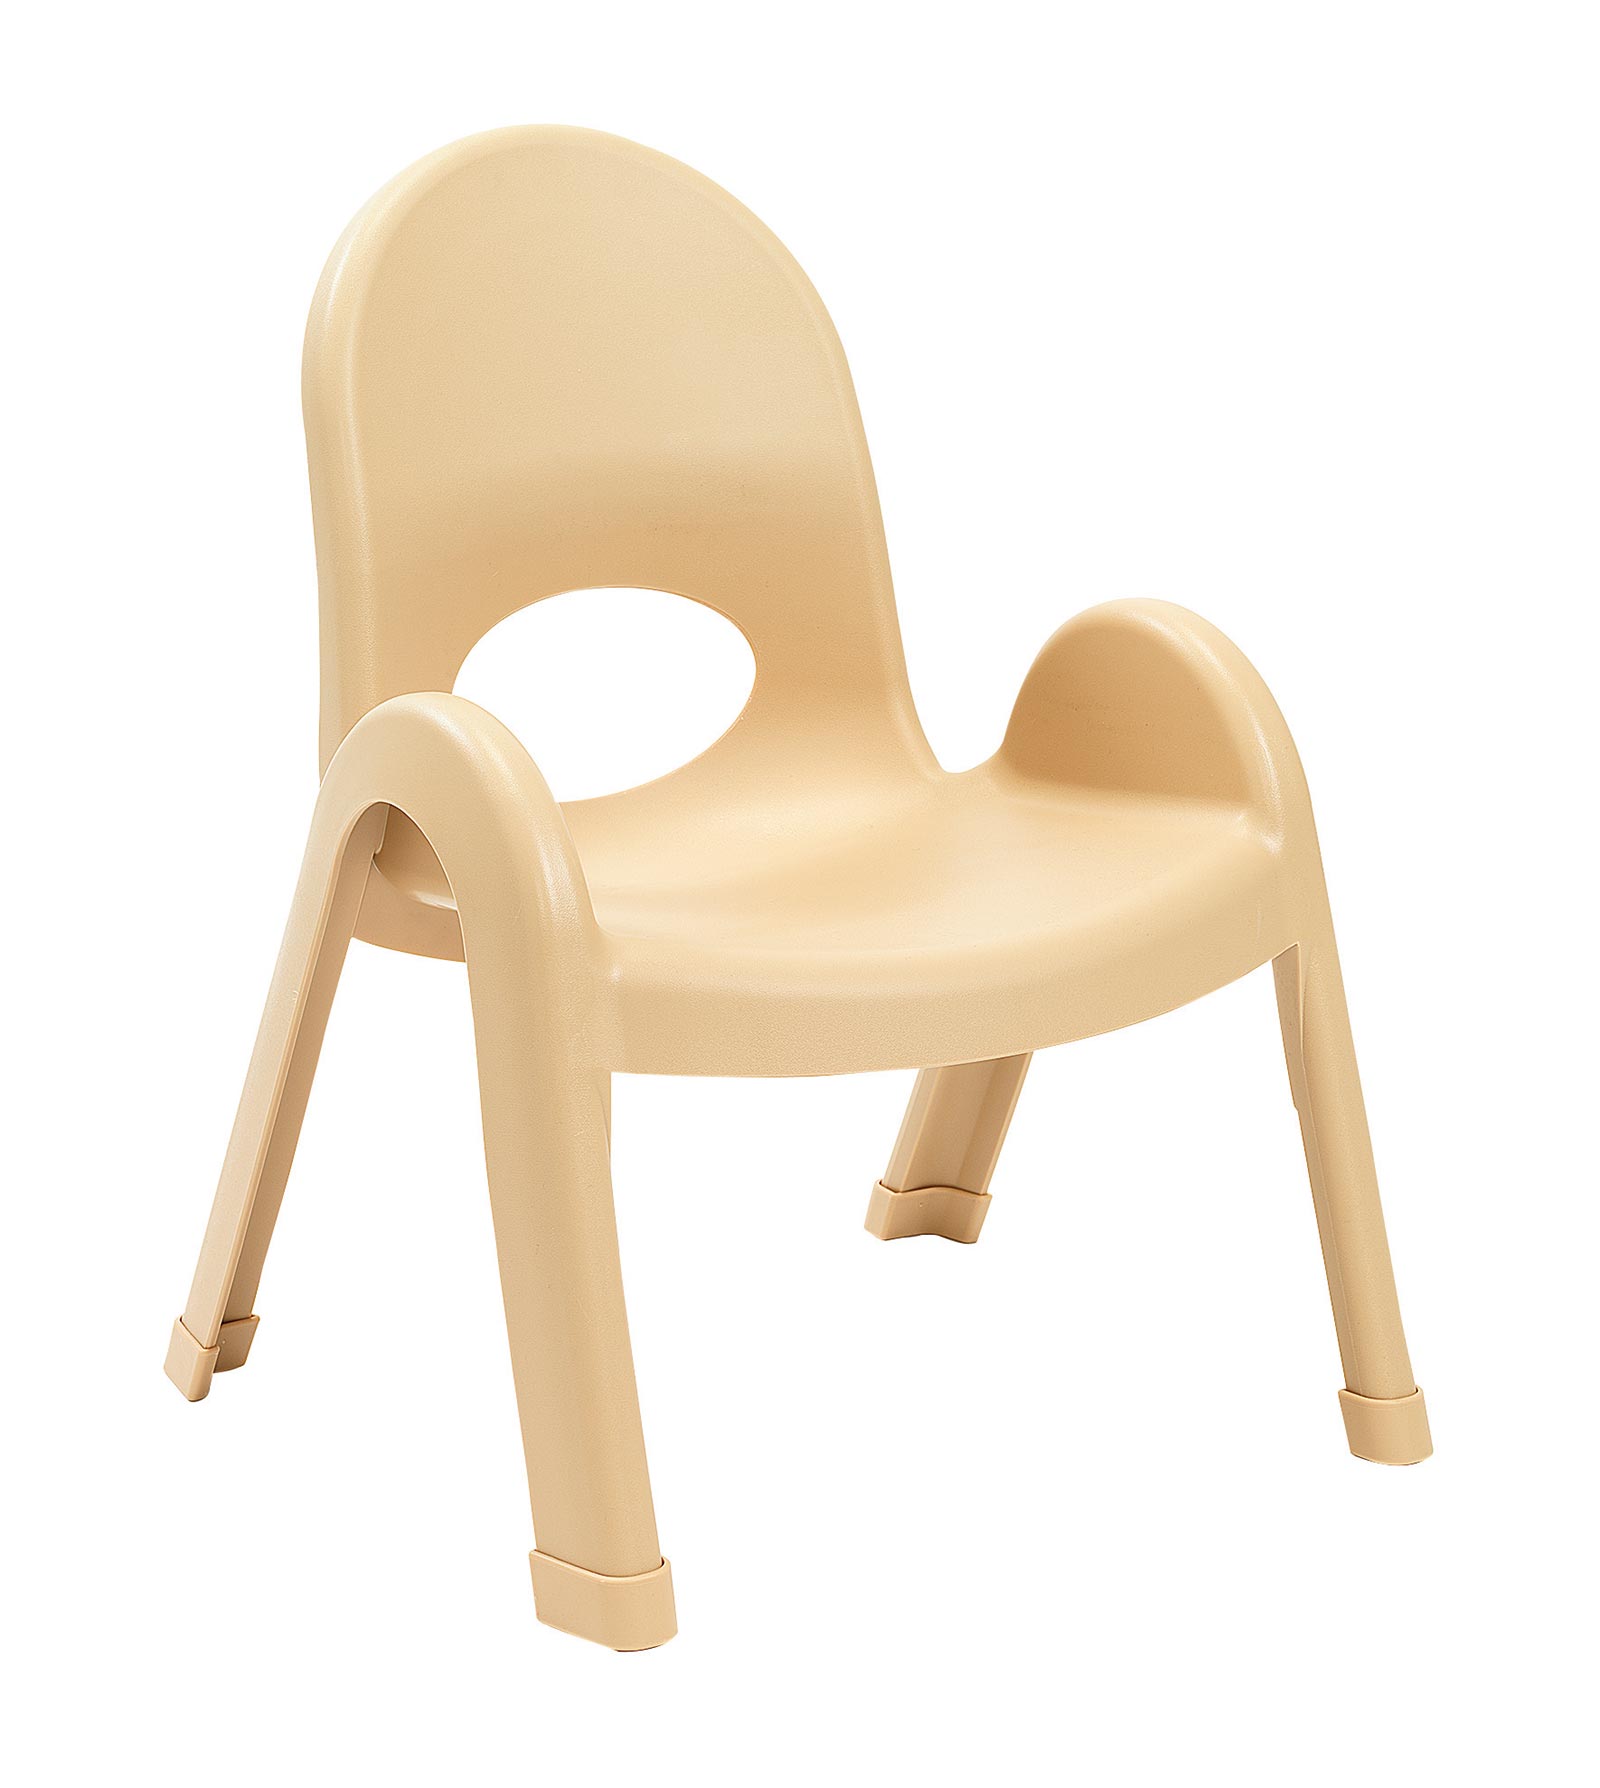 Value Stack™ 23 cm  Chair - Natural Tan